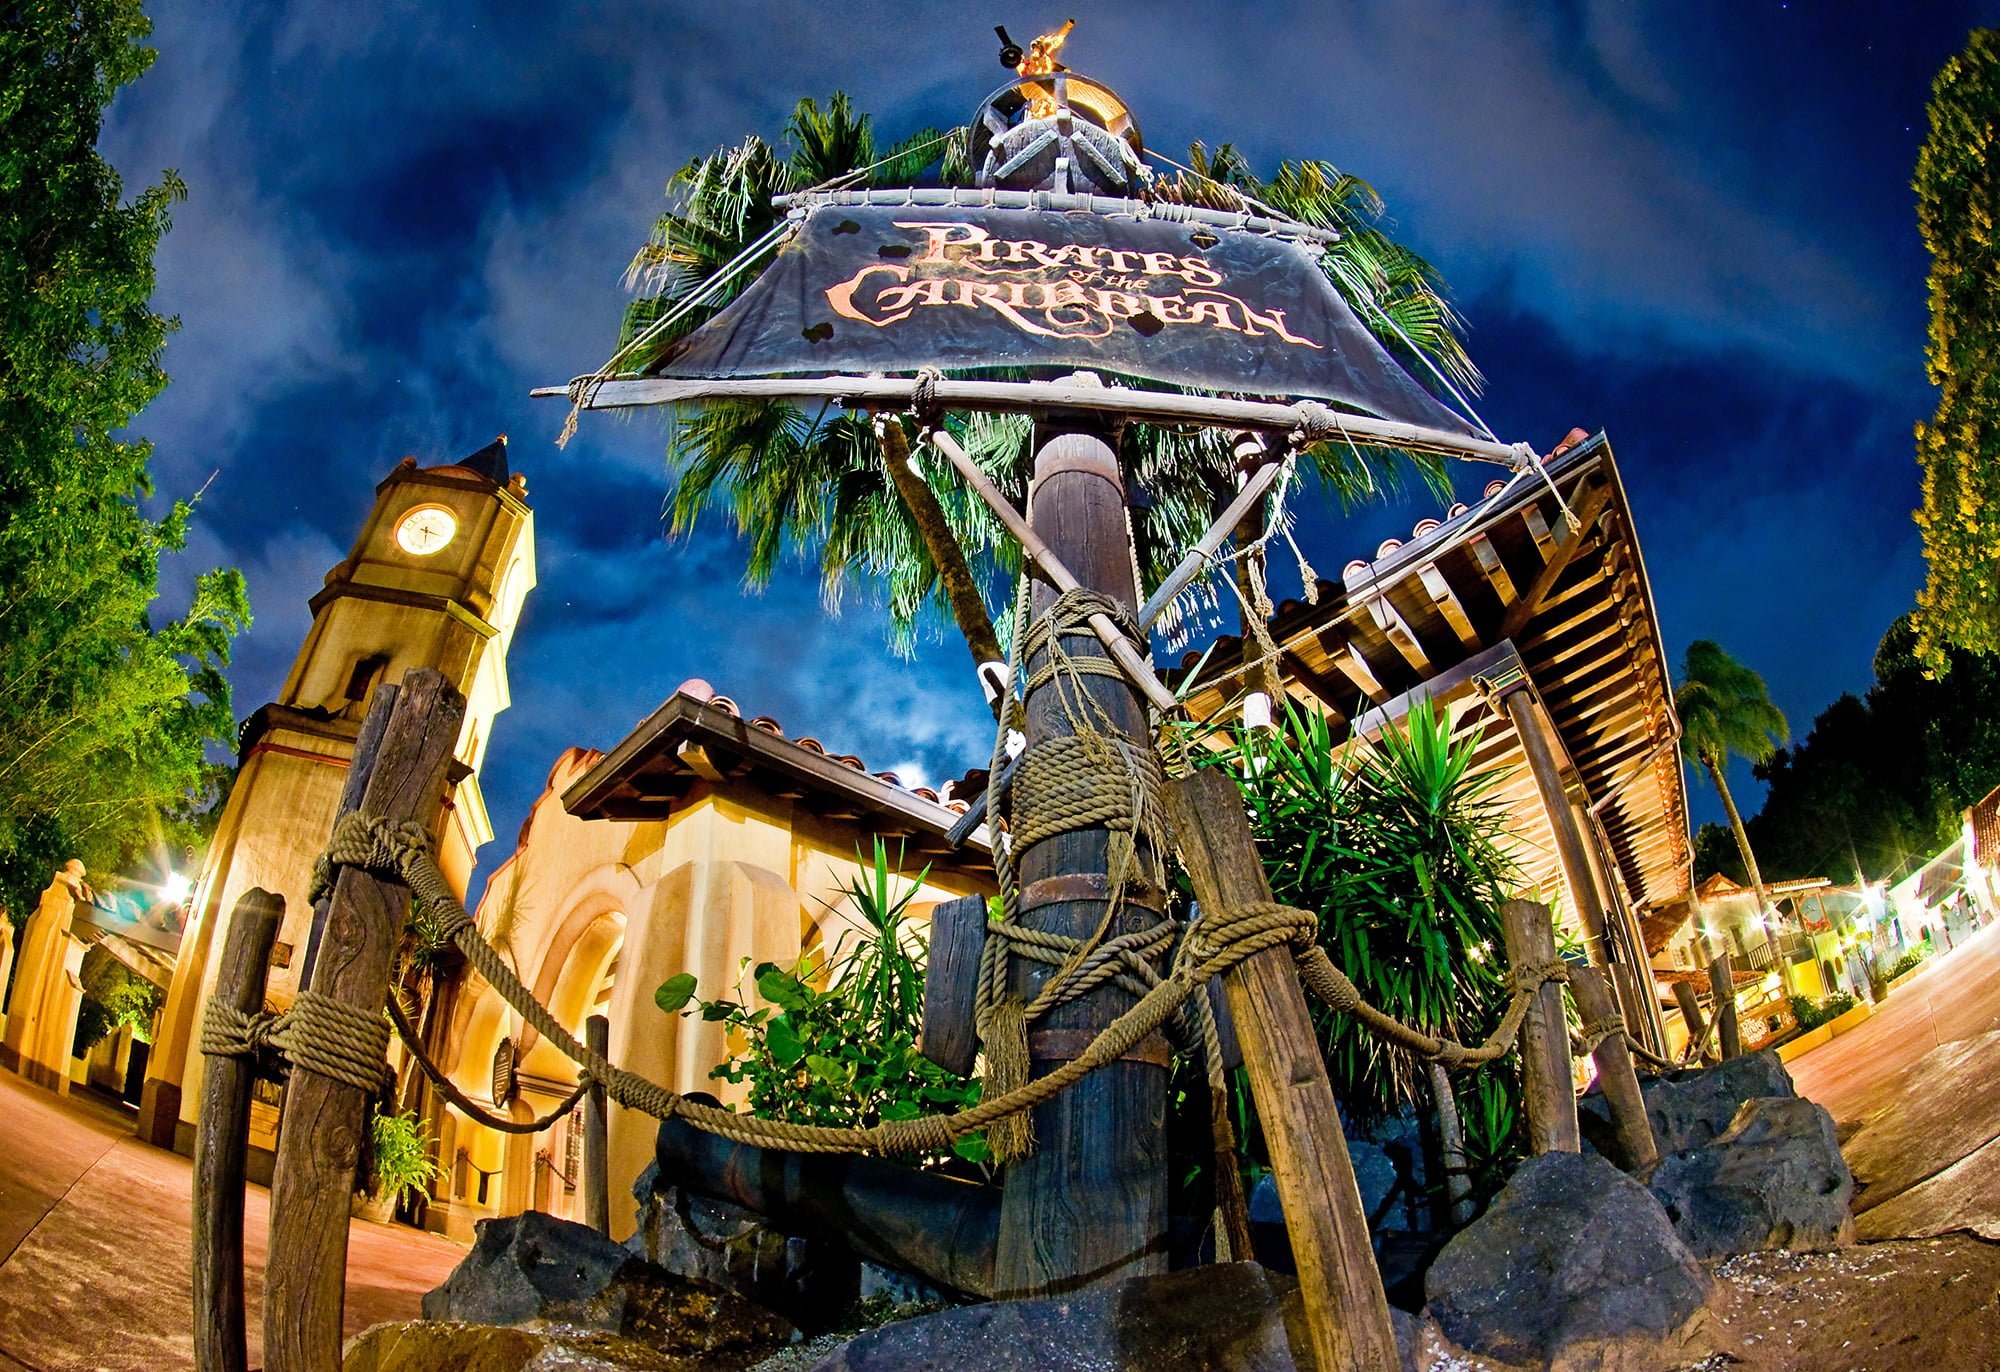 Pirates of the caribbean attraction